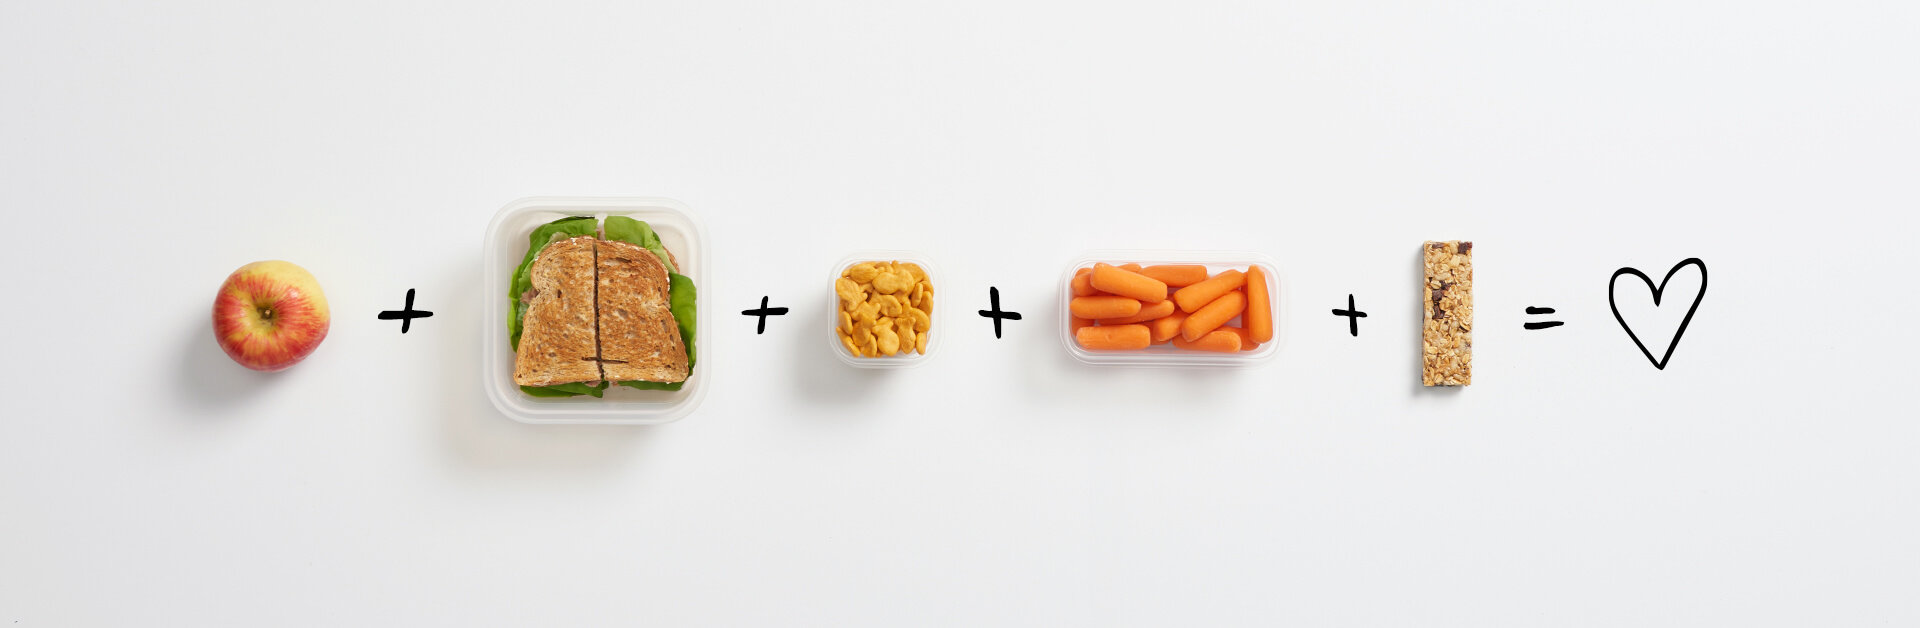 Apple, sandwich, crackers, baby carrots and a granola bar.